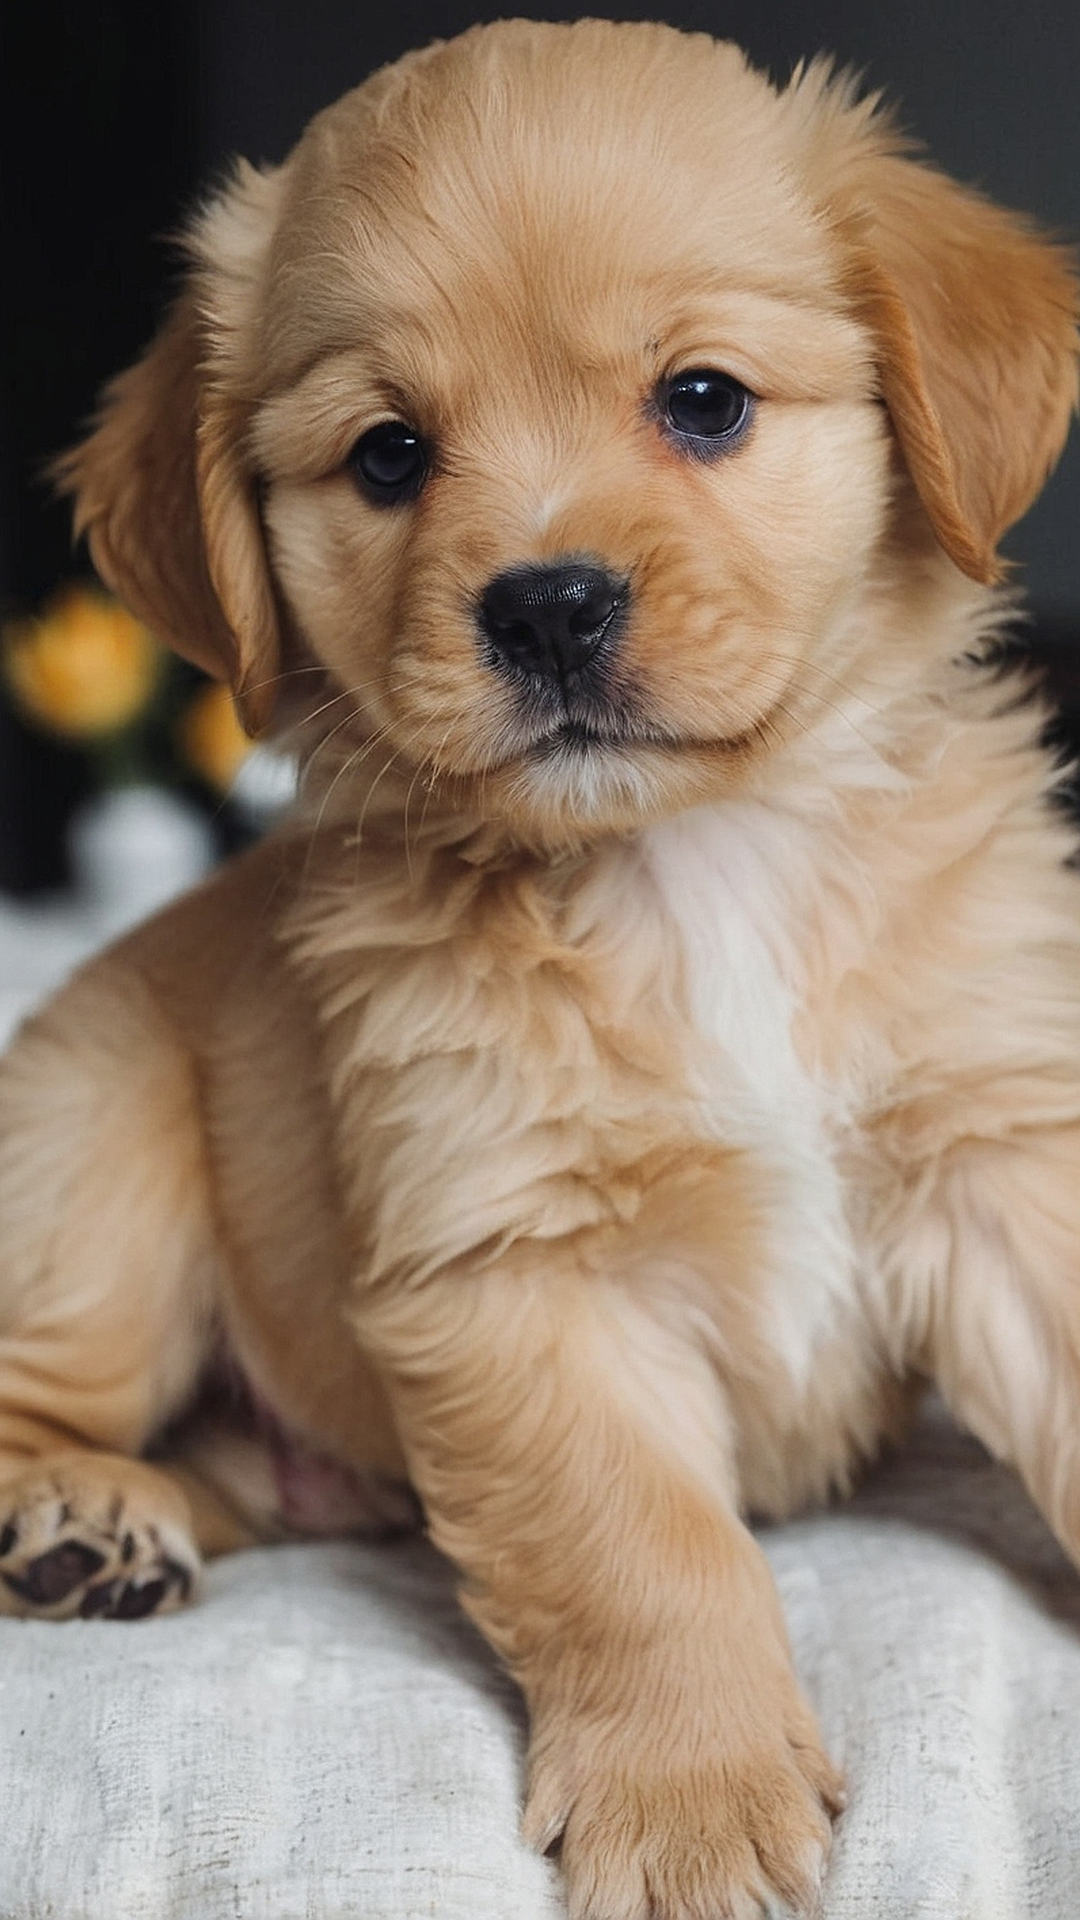 Sweetheart Puppies: 15 Smiling Faces